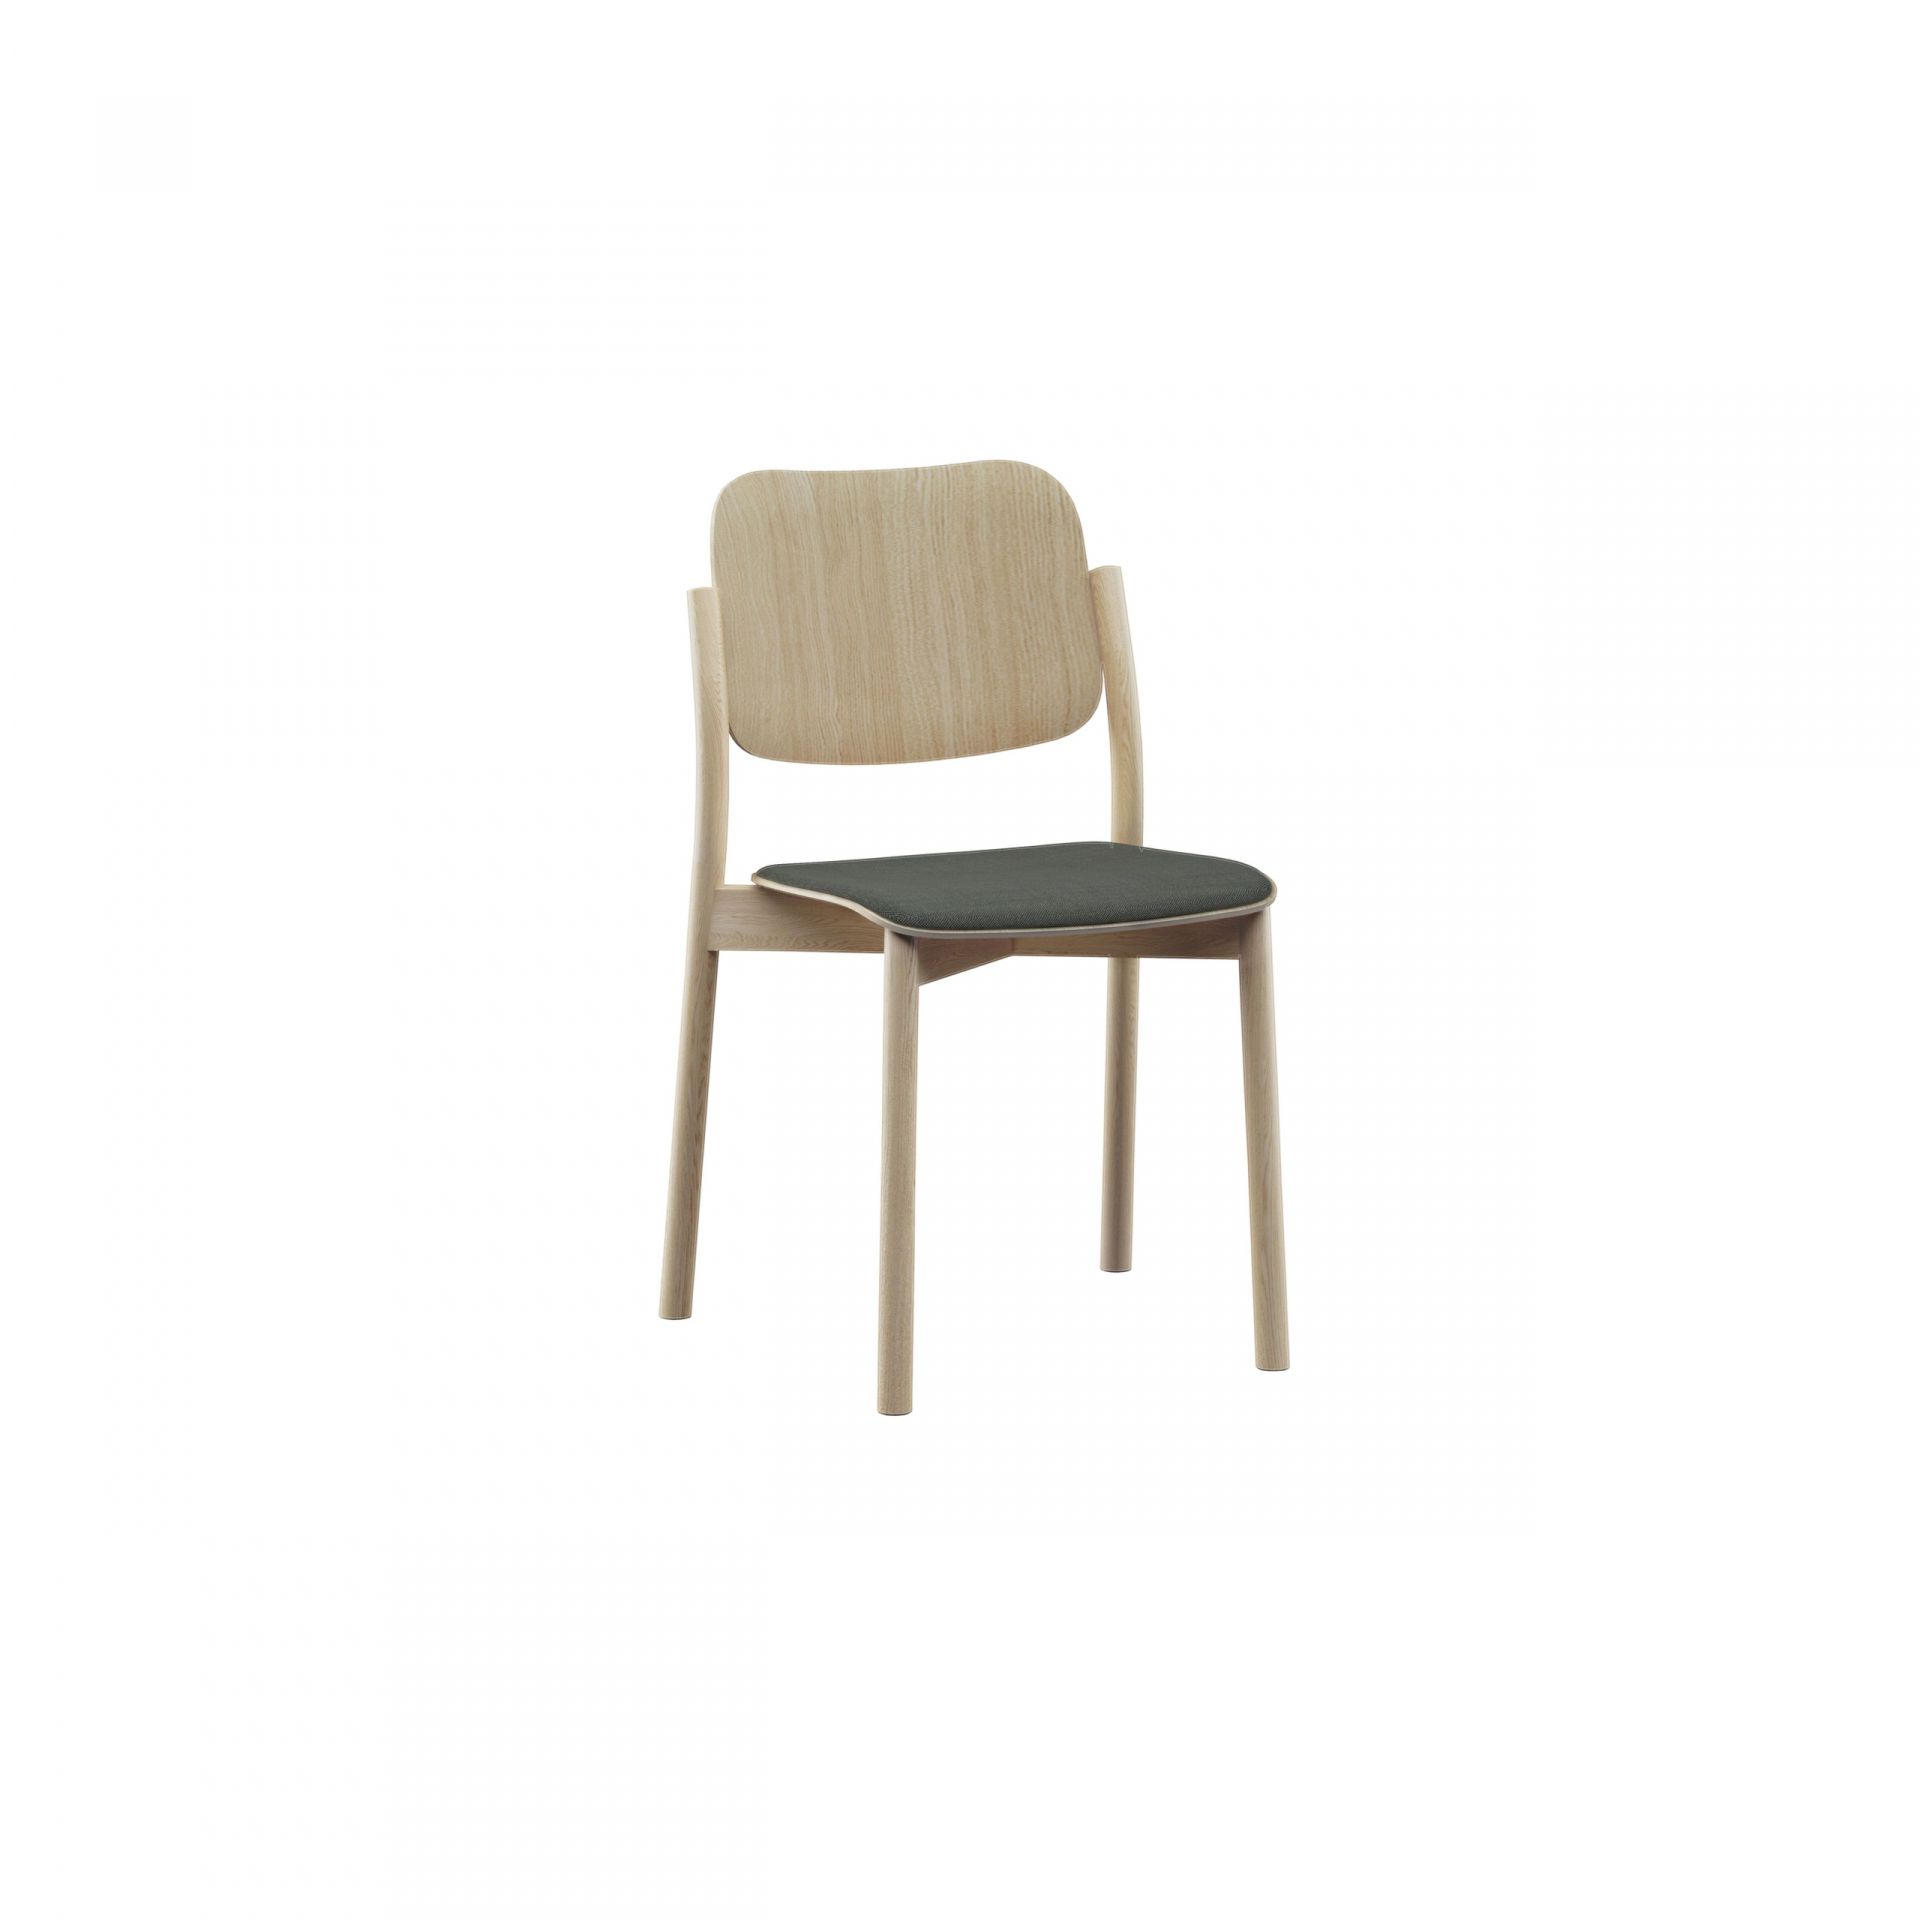 Zoe Wooden chair product image 1